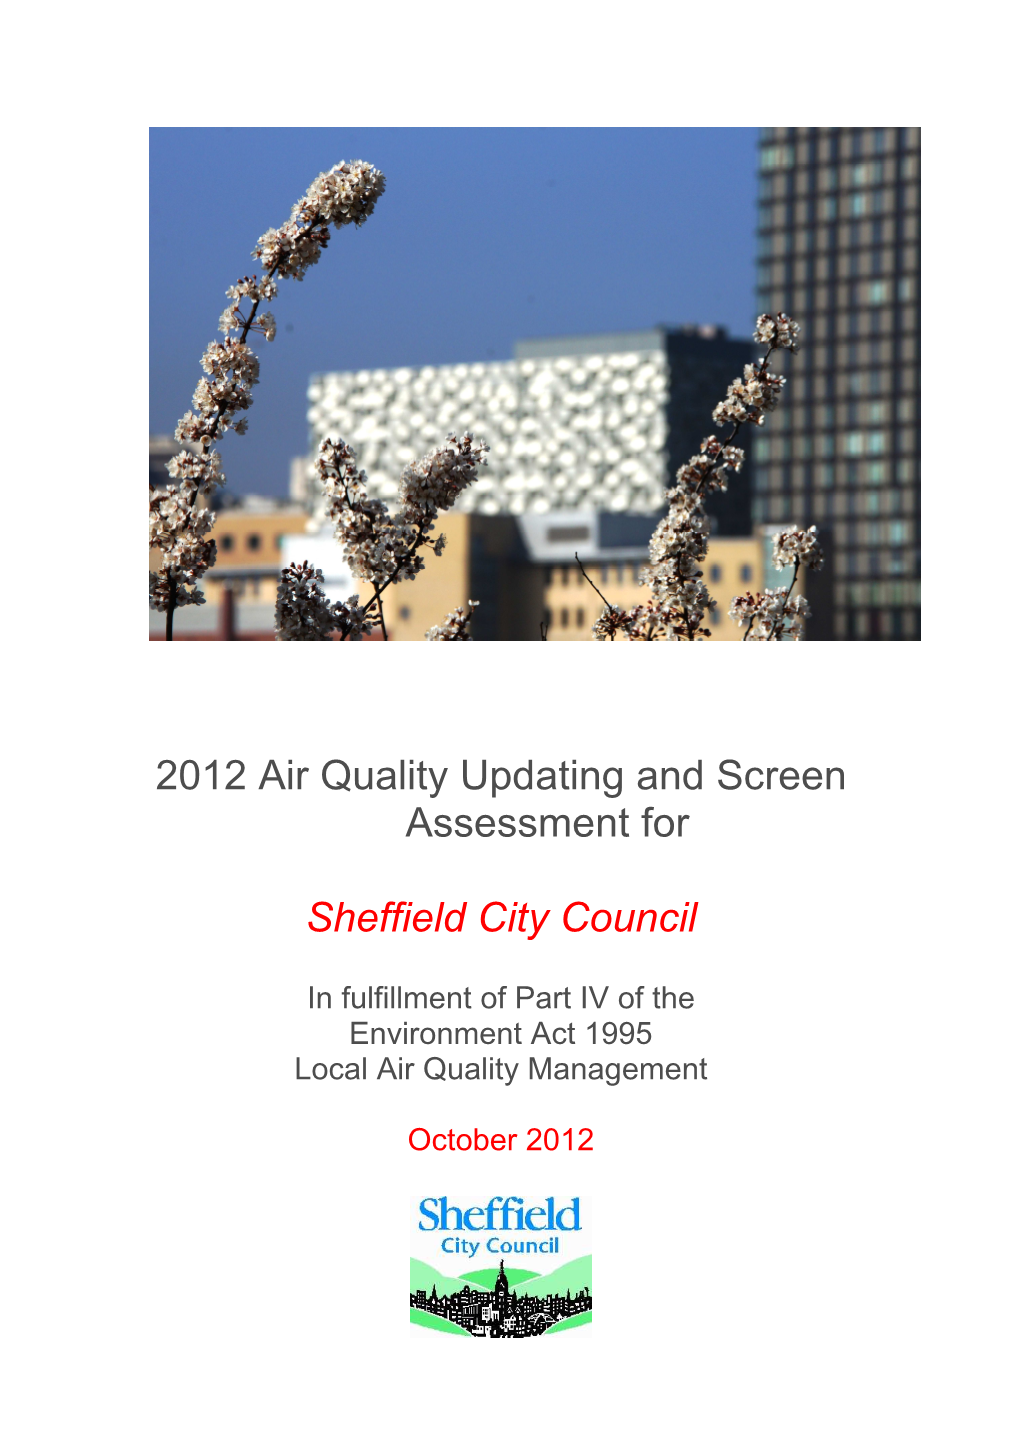 2012 Air Quality Updating and Screen Assessment For